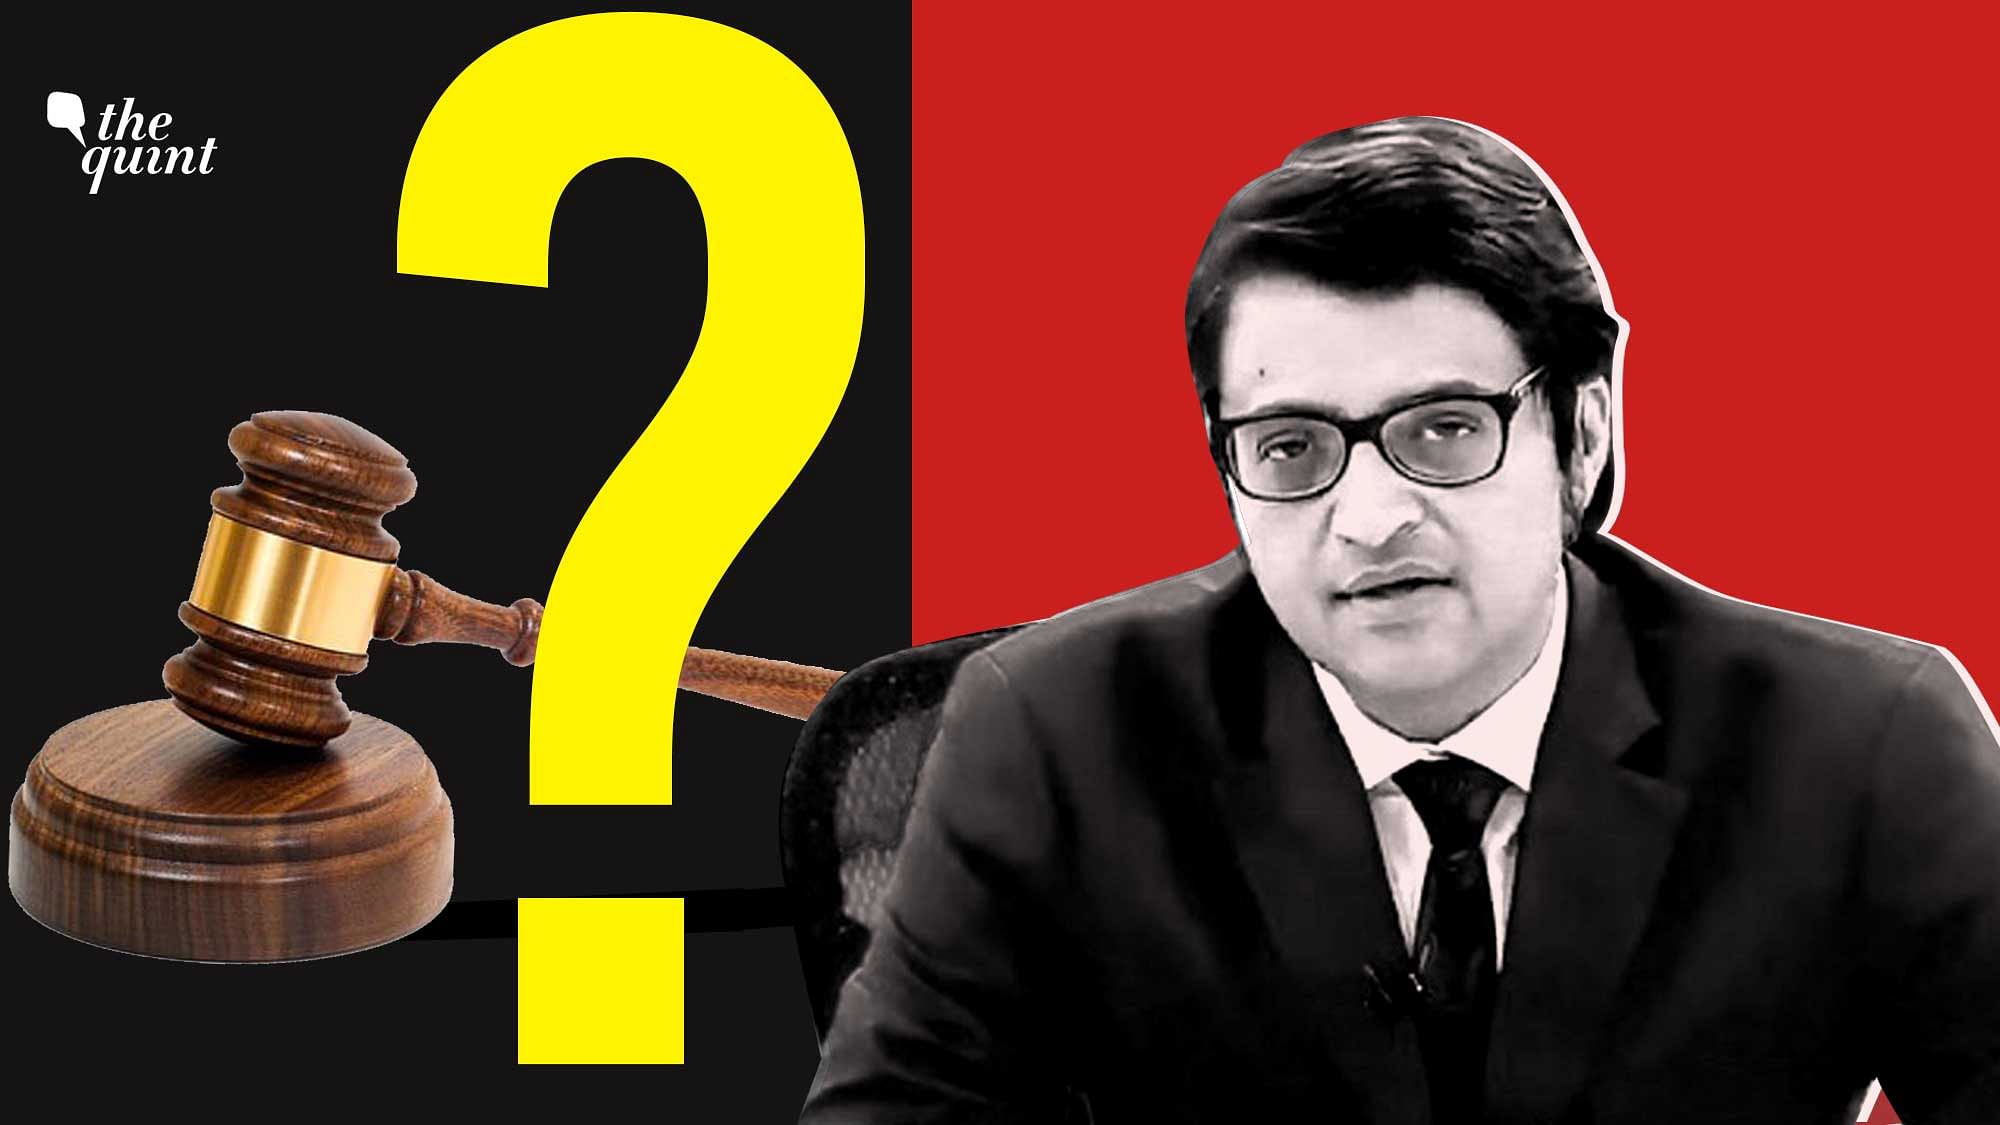 What the Bombay High Court’s decision to reject bail for Arnab Goswami was based on.